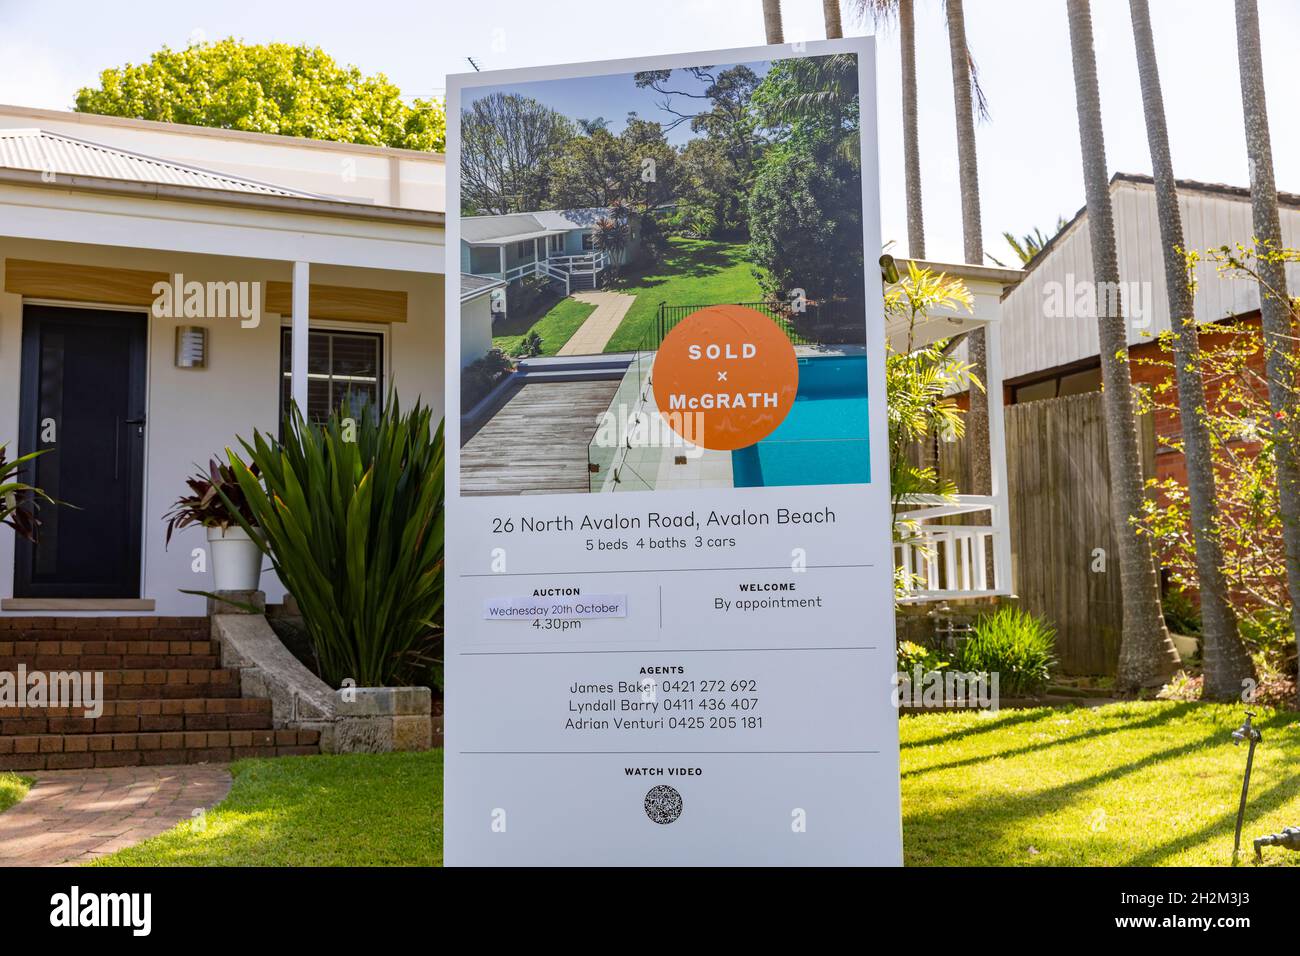 Sydney home in Avalon Beach sold during the spring property market by Mcgrath real estate,Avalon Beach suburb,Australia Stock Photo